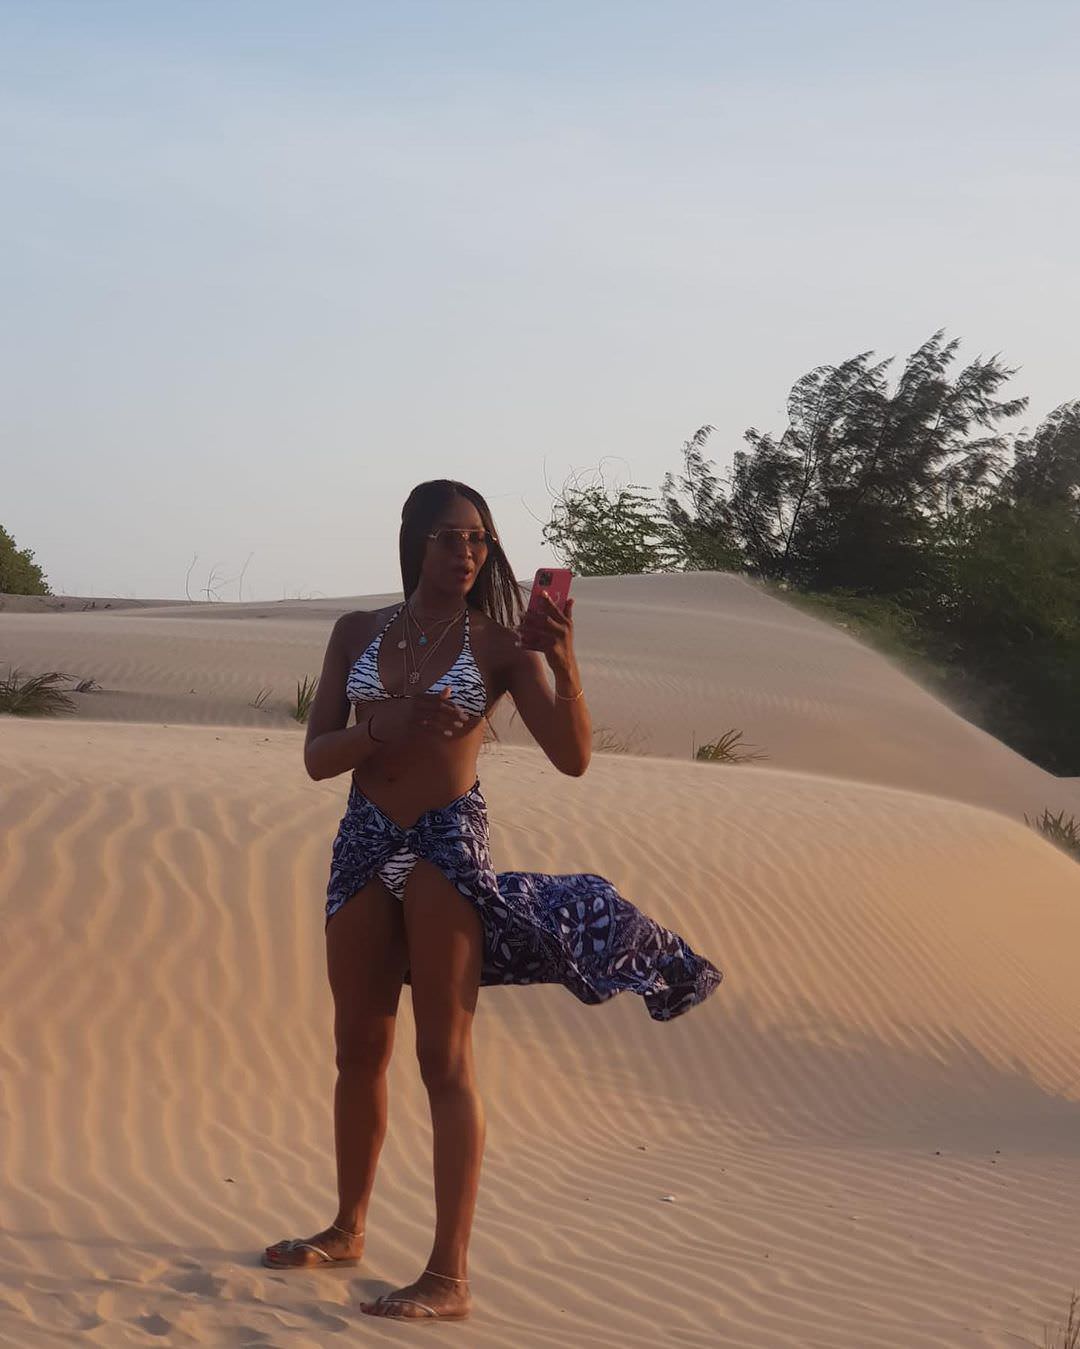 During her trip to Africa, the supermodel posed in the desert sand, dressed in Melissa Odabash's "Grenada" tiger-print bikini with a blue sarong.